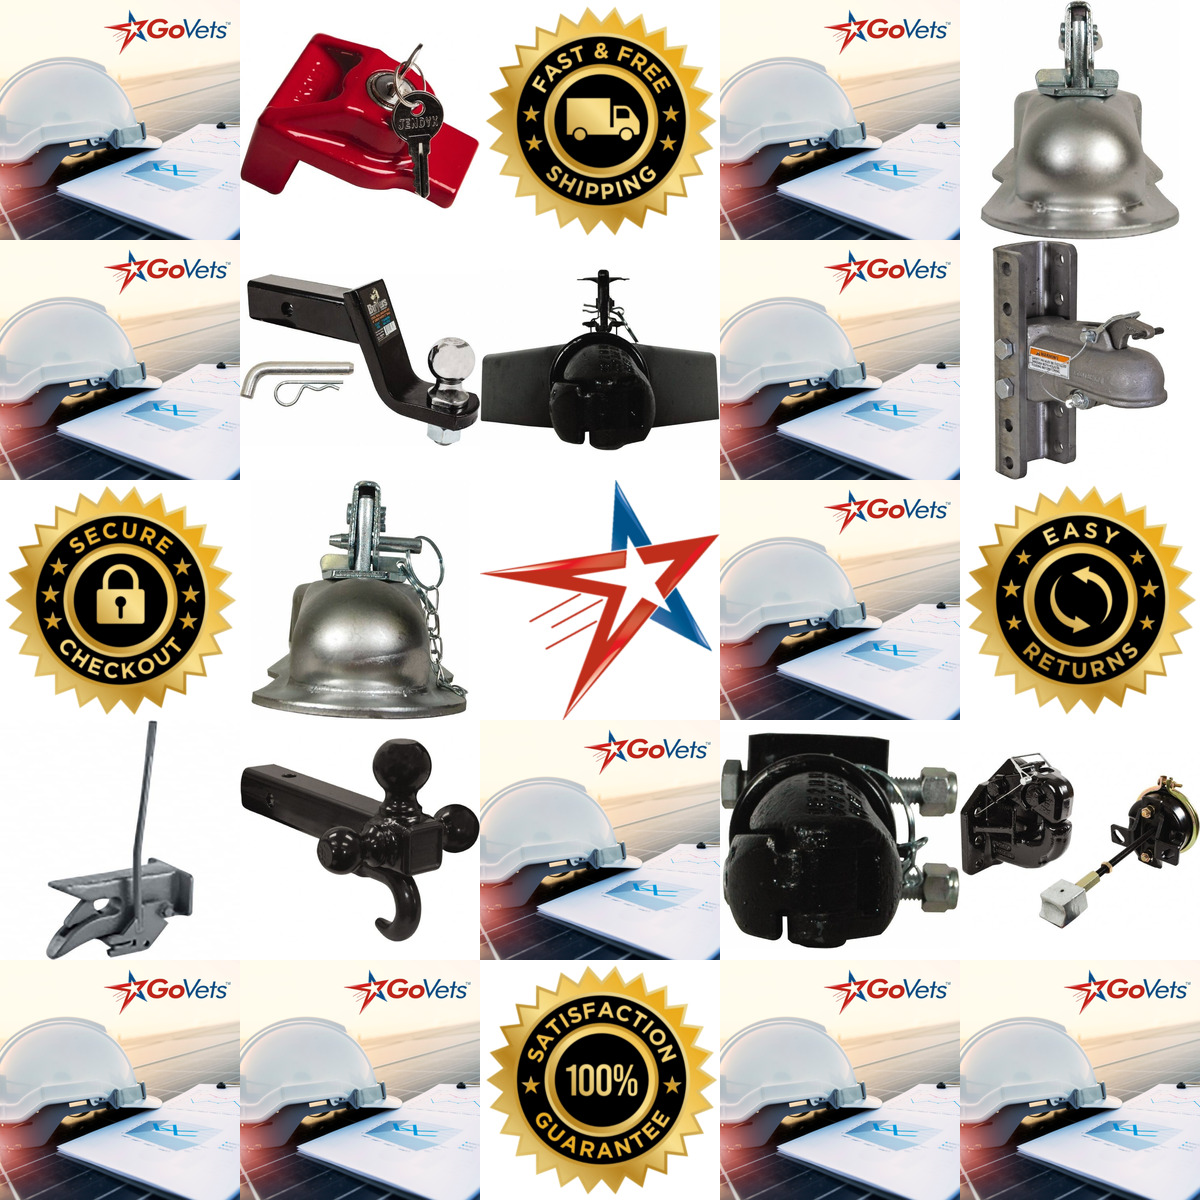 A selection of Hitch Equipment products on GoVets